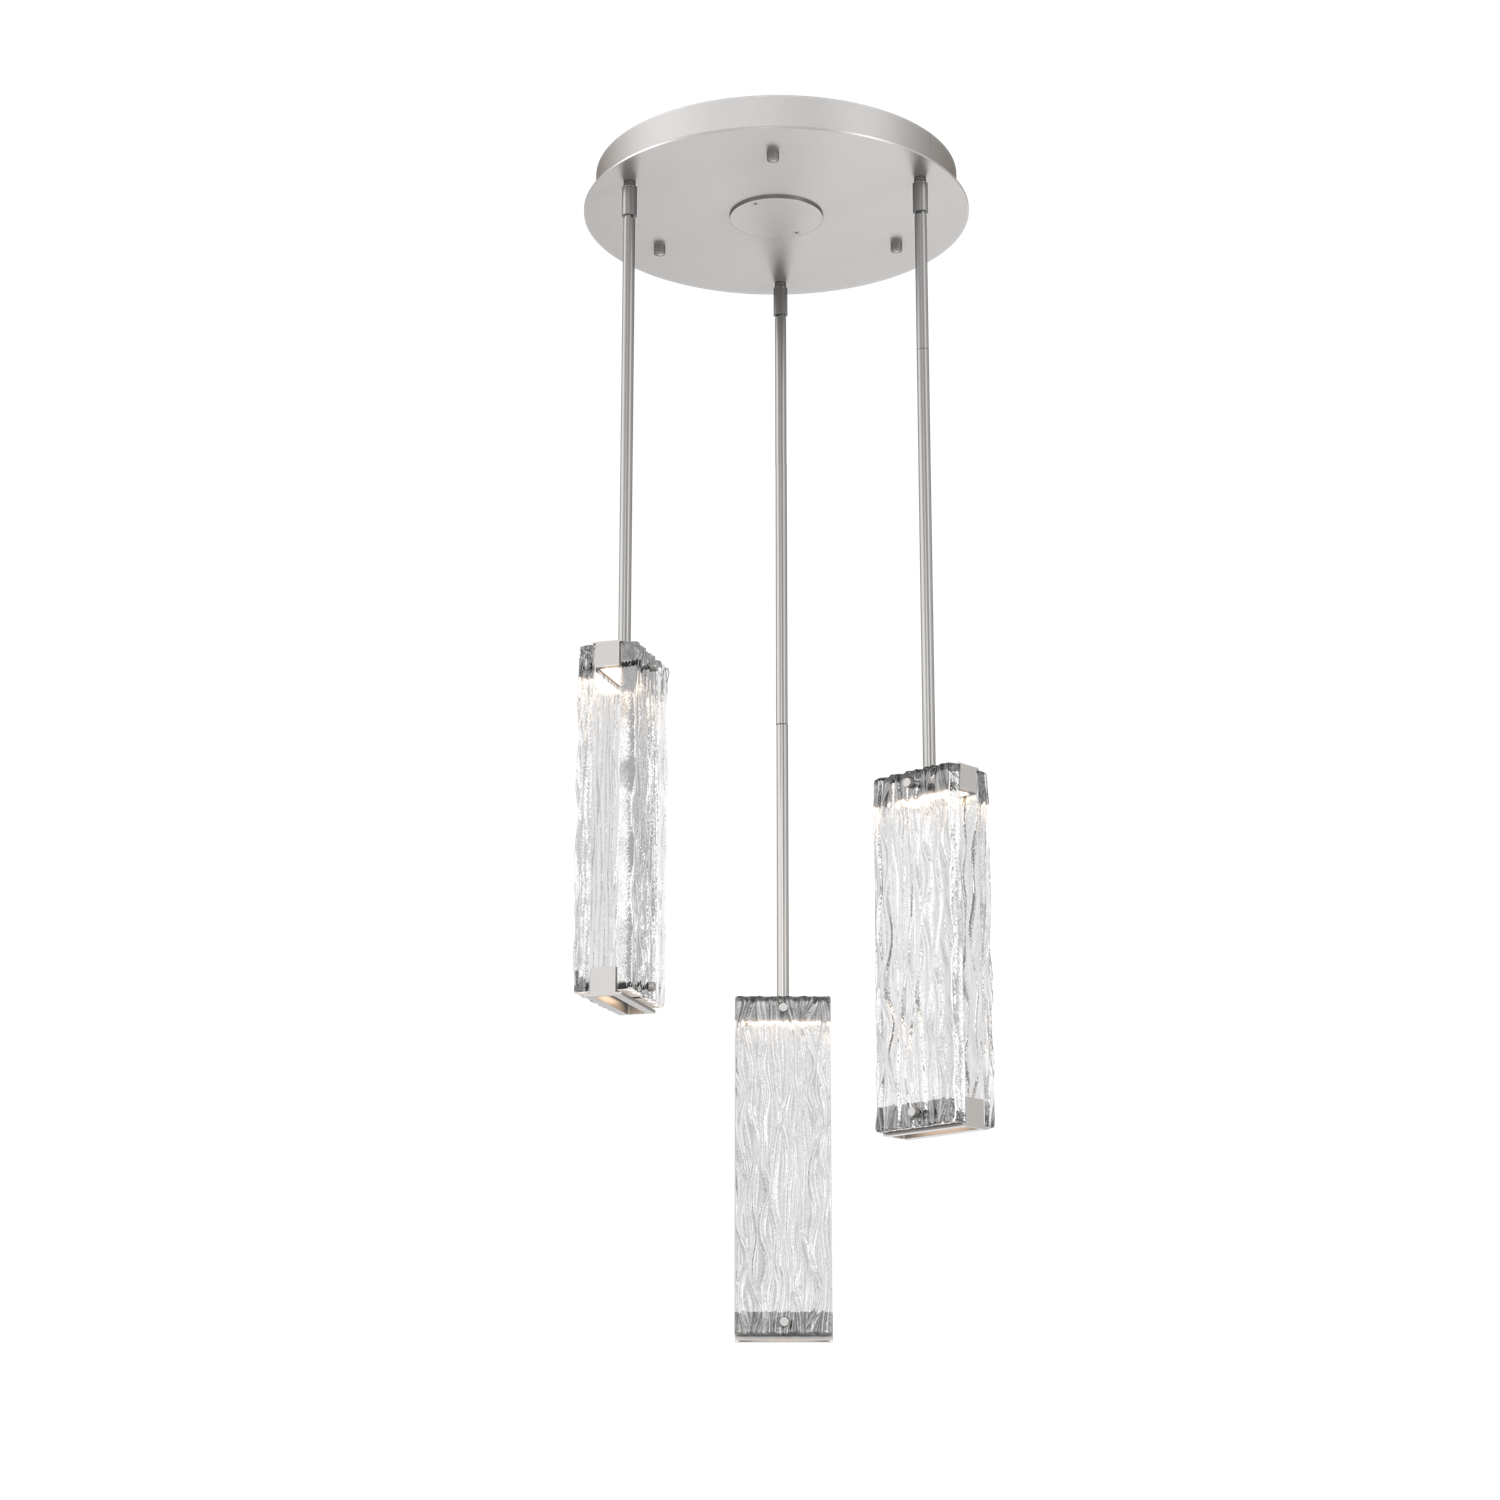 CHB0090-03-BS-TT-Hammerton-Studio-Tabulo-3-light-multi-pendant-chandelier-with-beige-silver-finish-and-clear-tidal-cast-glass-shade-and-LED-lamping